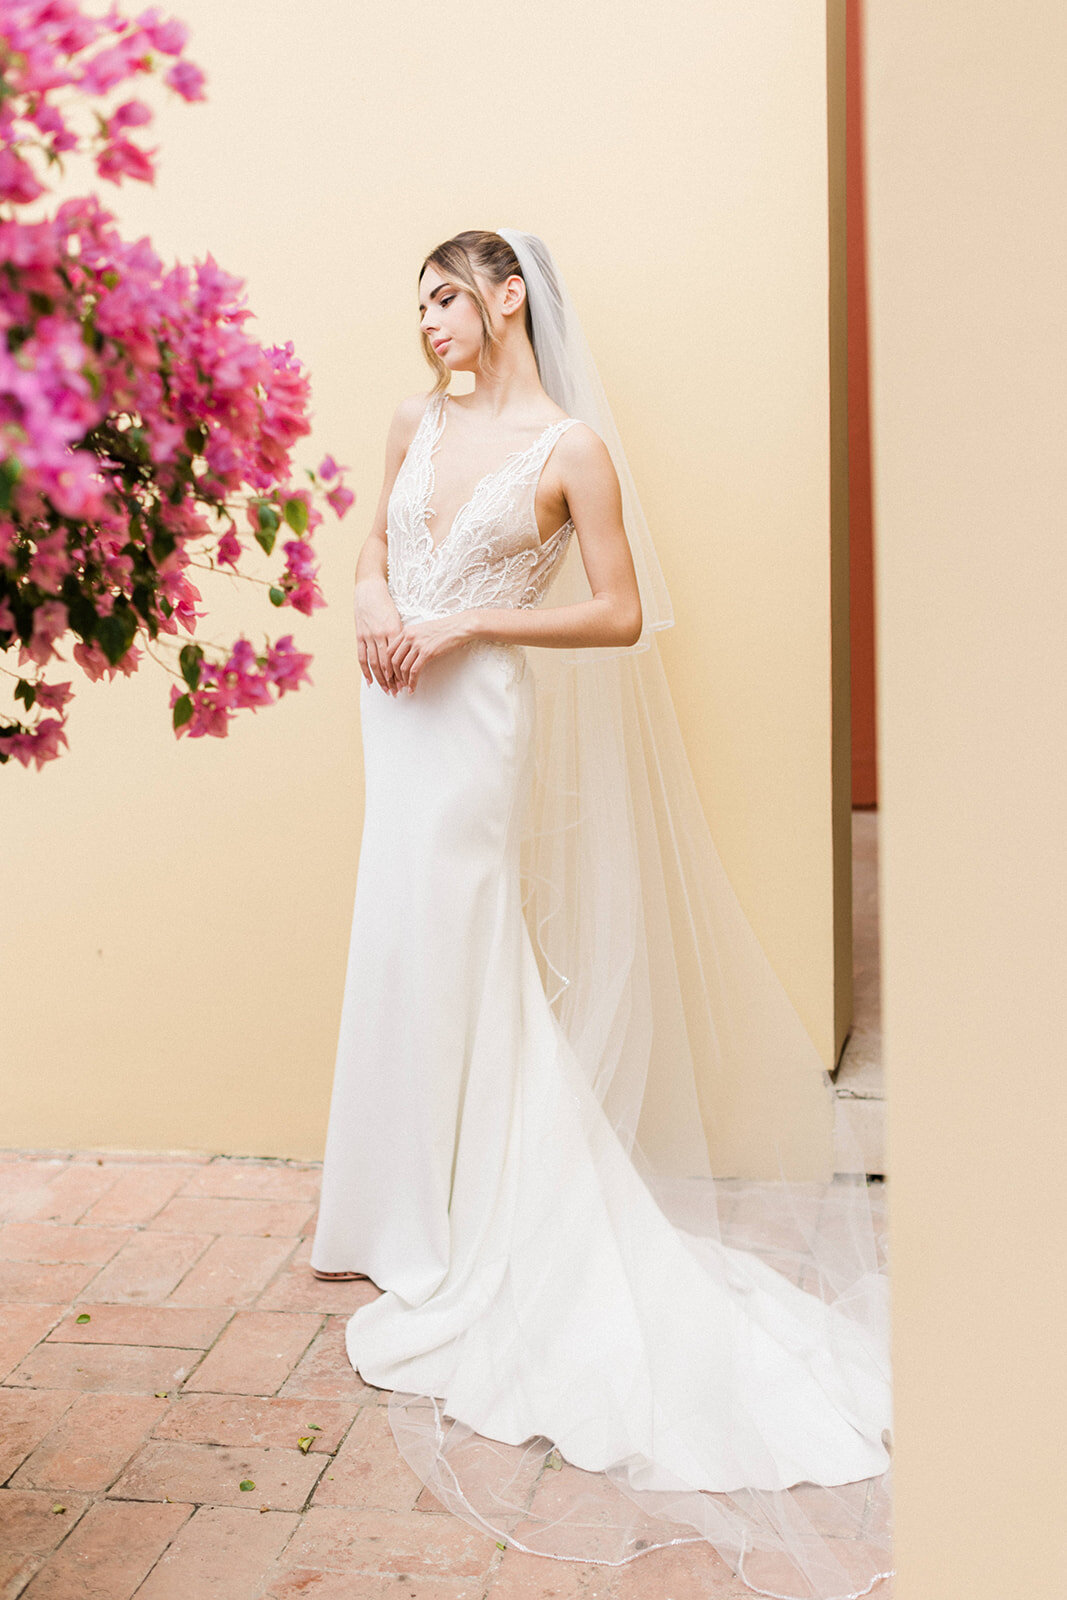 Watters Wedaways Sofitel Cartagena Colombia-Valorie Darling Photography-DF1A2360